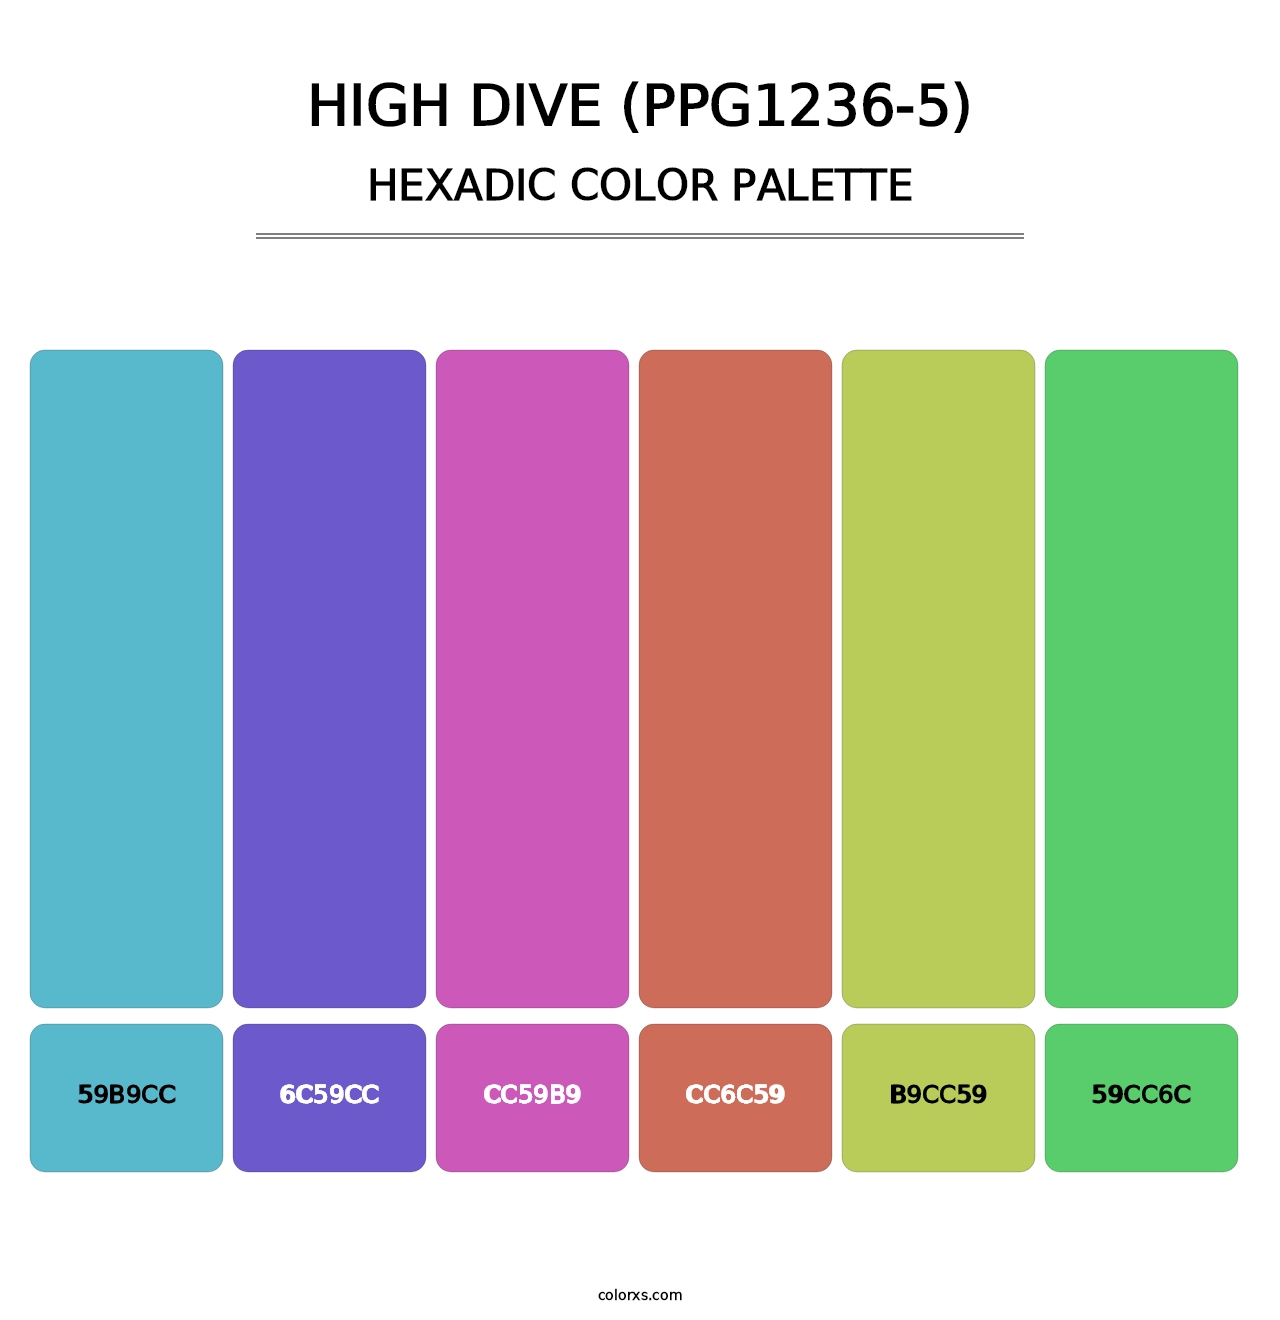 High Dive (PPG1236-5) - Hexadic Color Palette